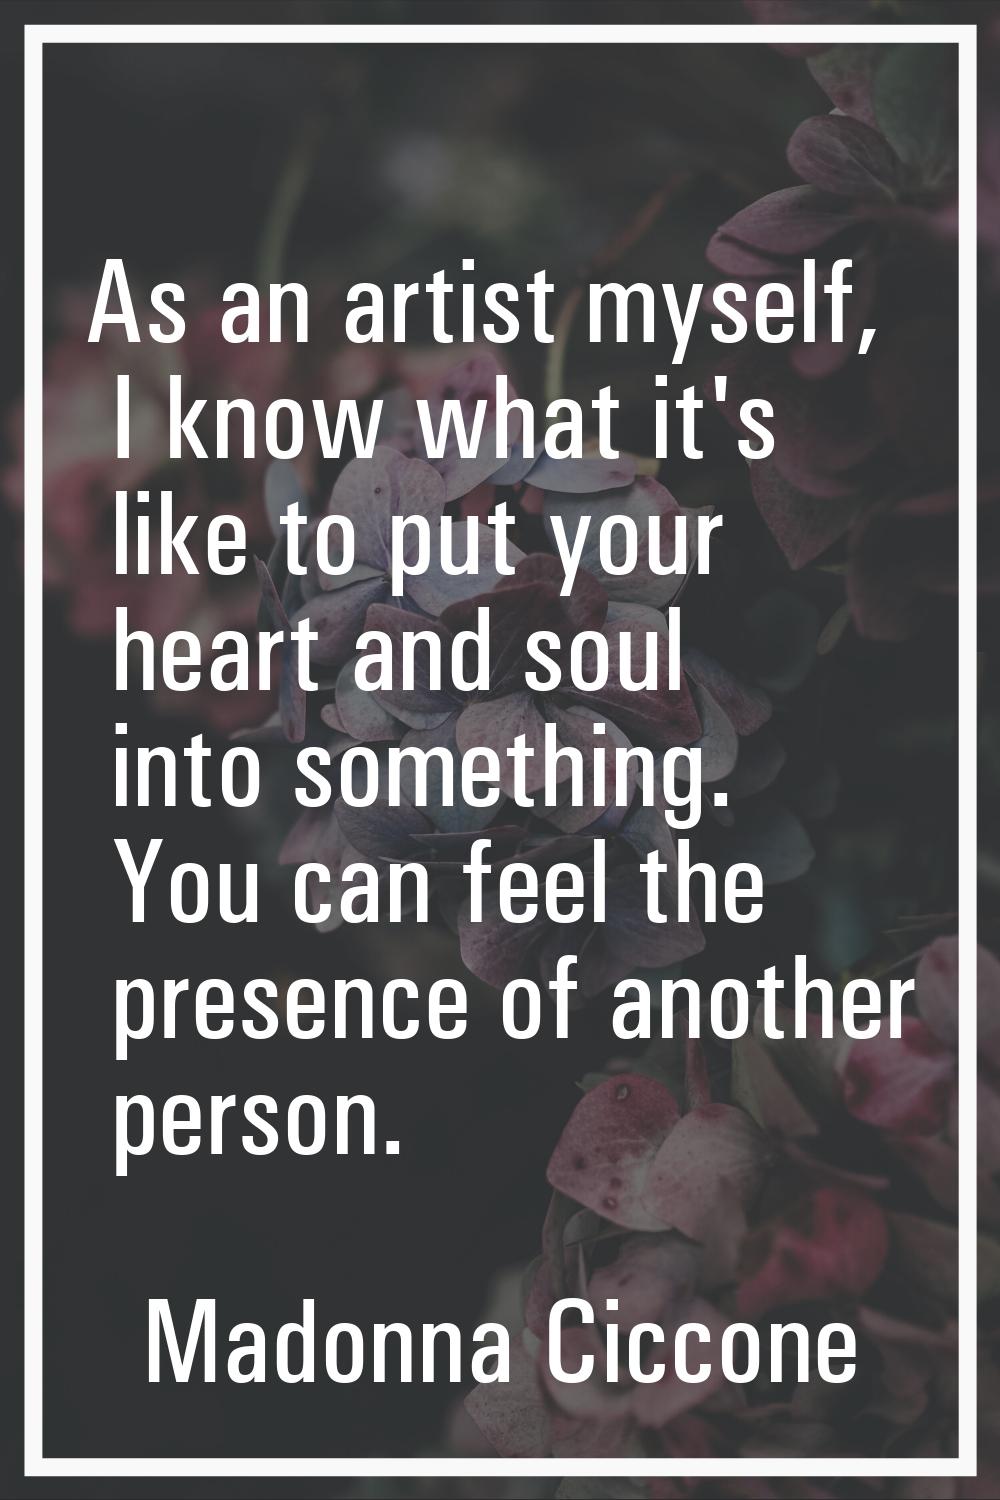 As an artist myself, I know what it's like to put your heart and soul into something. You can feel 